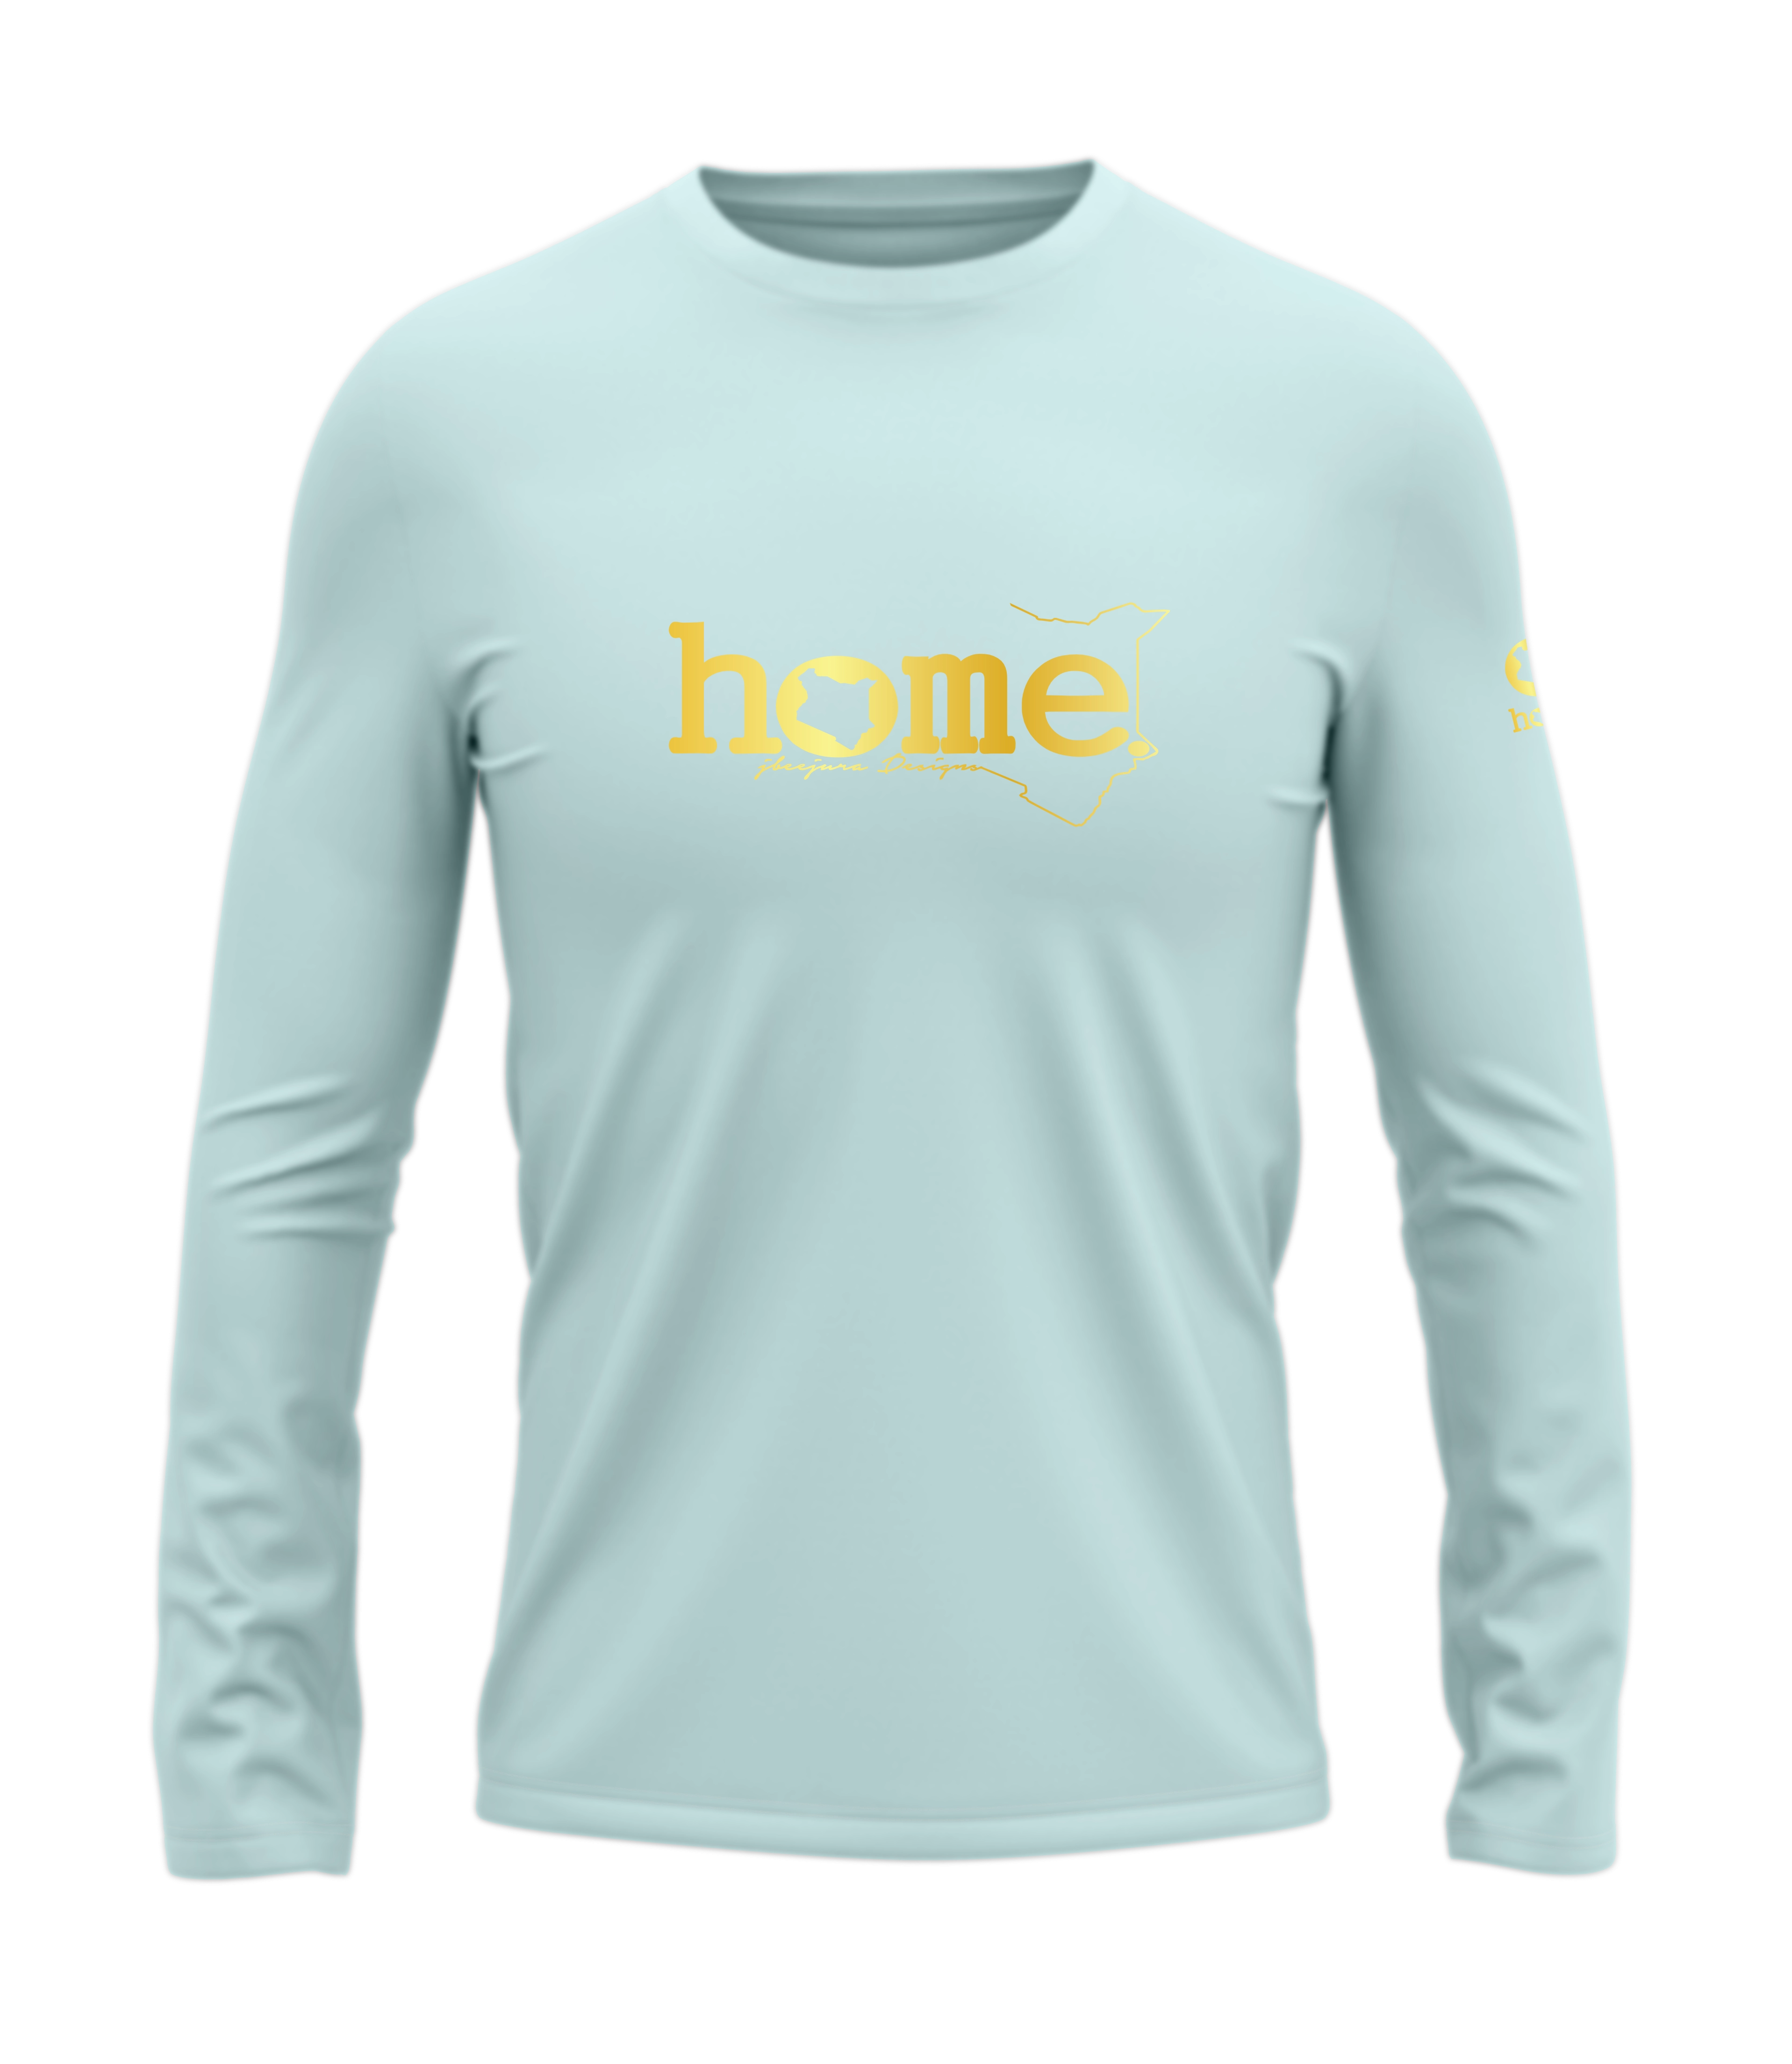 home_254 LONG-SLEEVED MISTY BLUE T-SHIRT WITH A GOLD CLASSIC WORDS PRINT – COTTON PLUS FABRIC